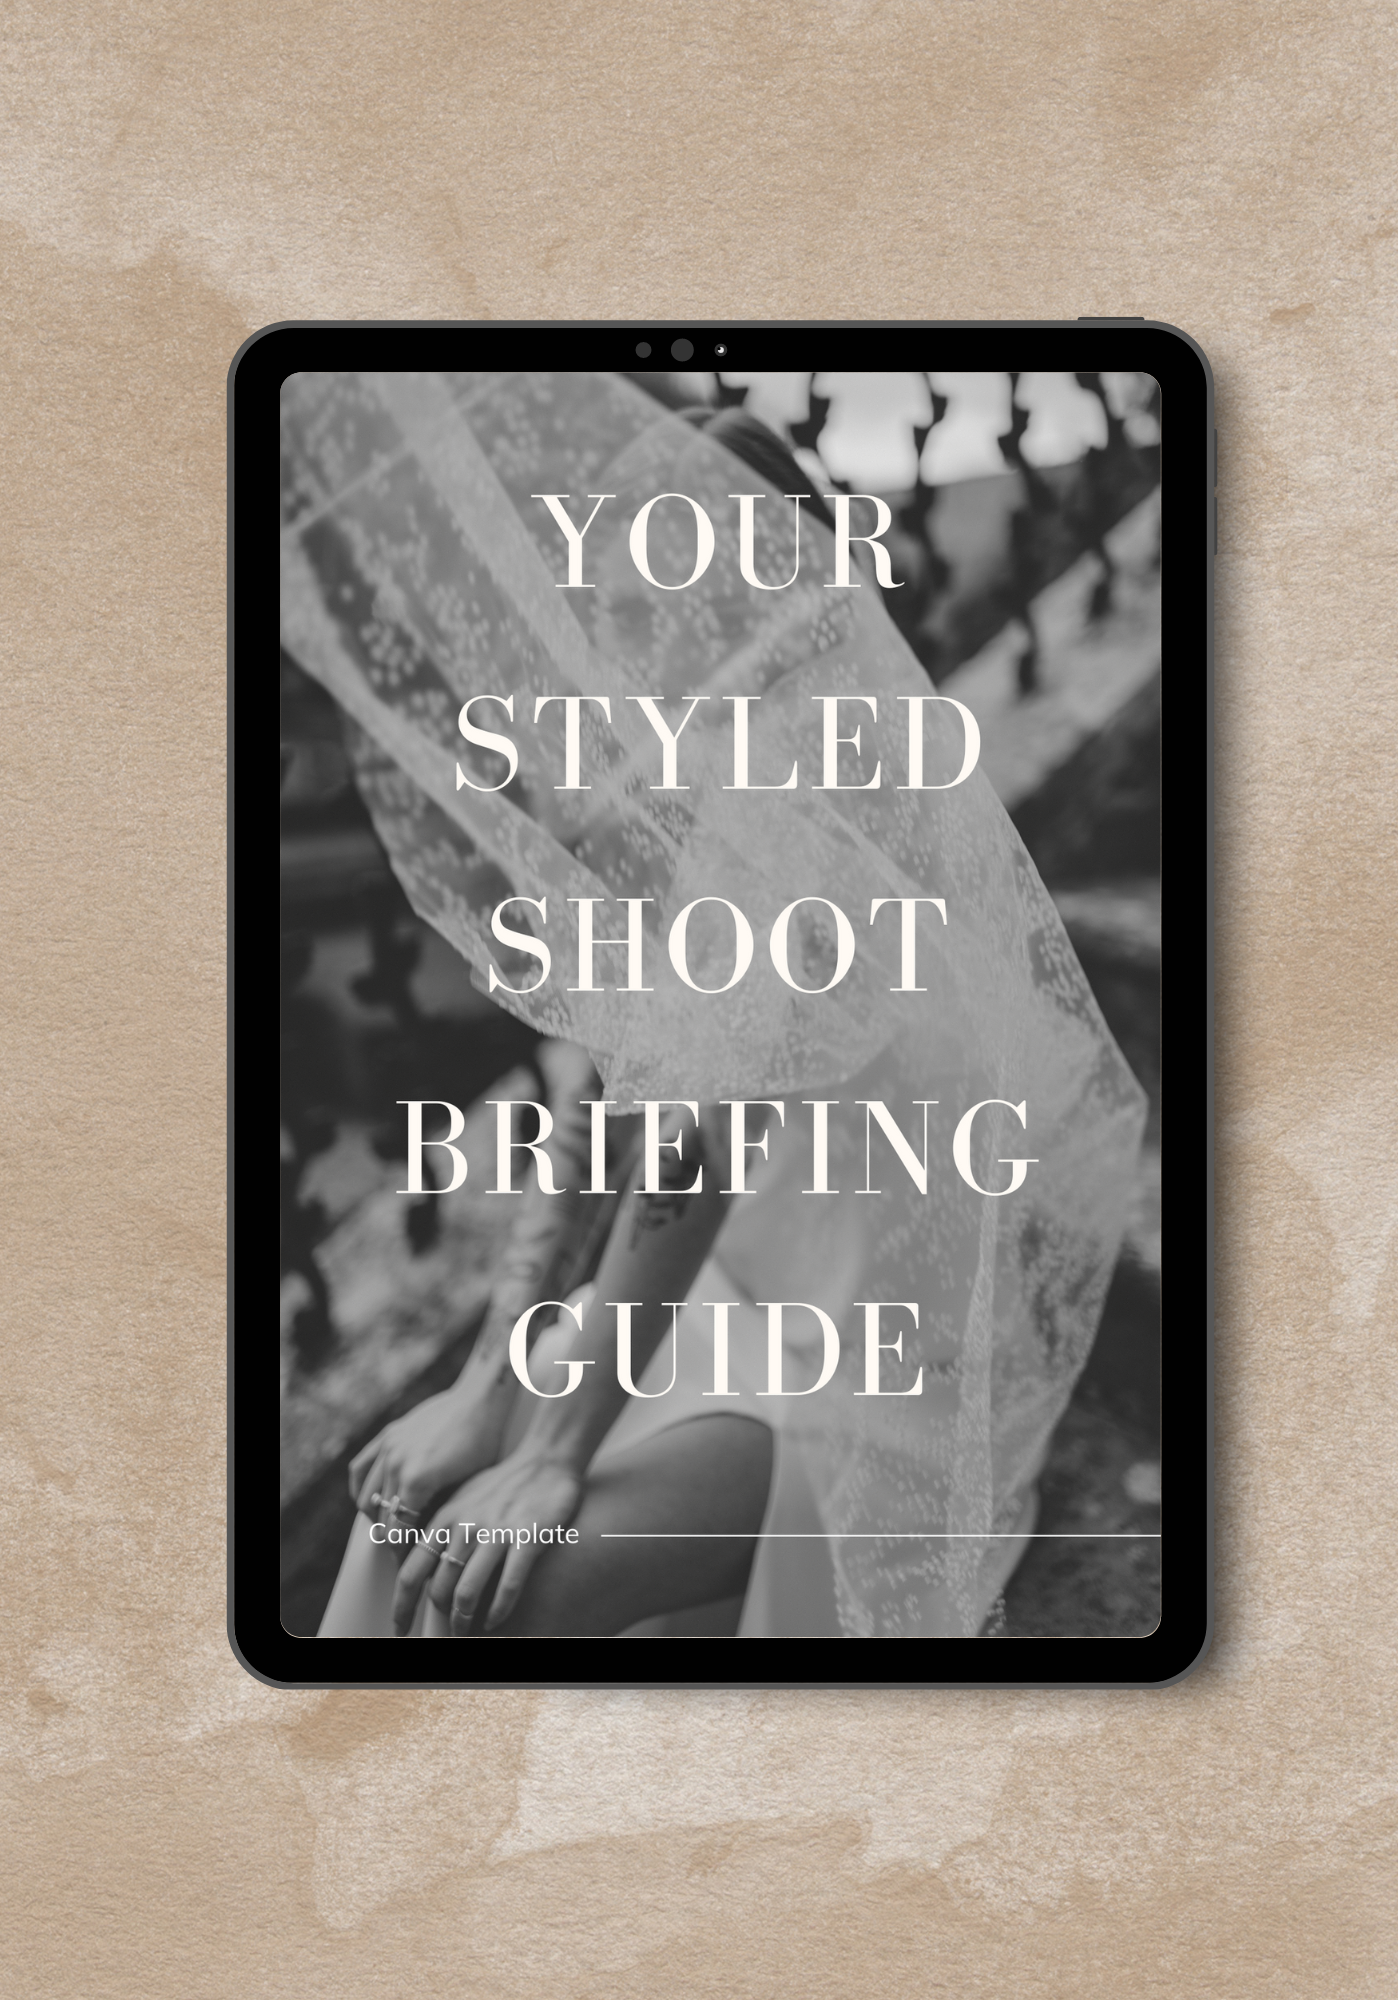 Styled Shoot Briefing Guide